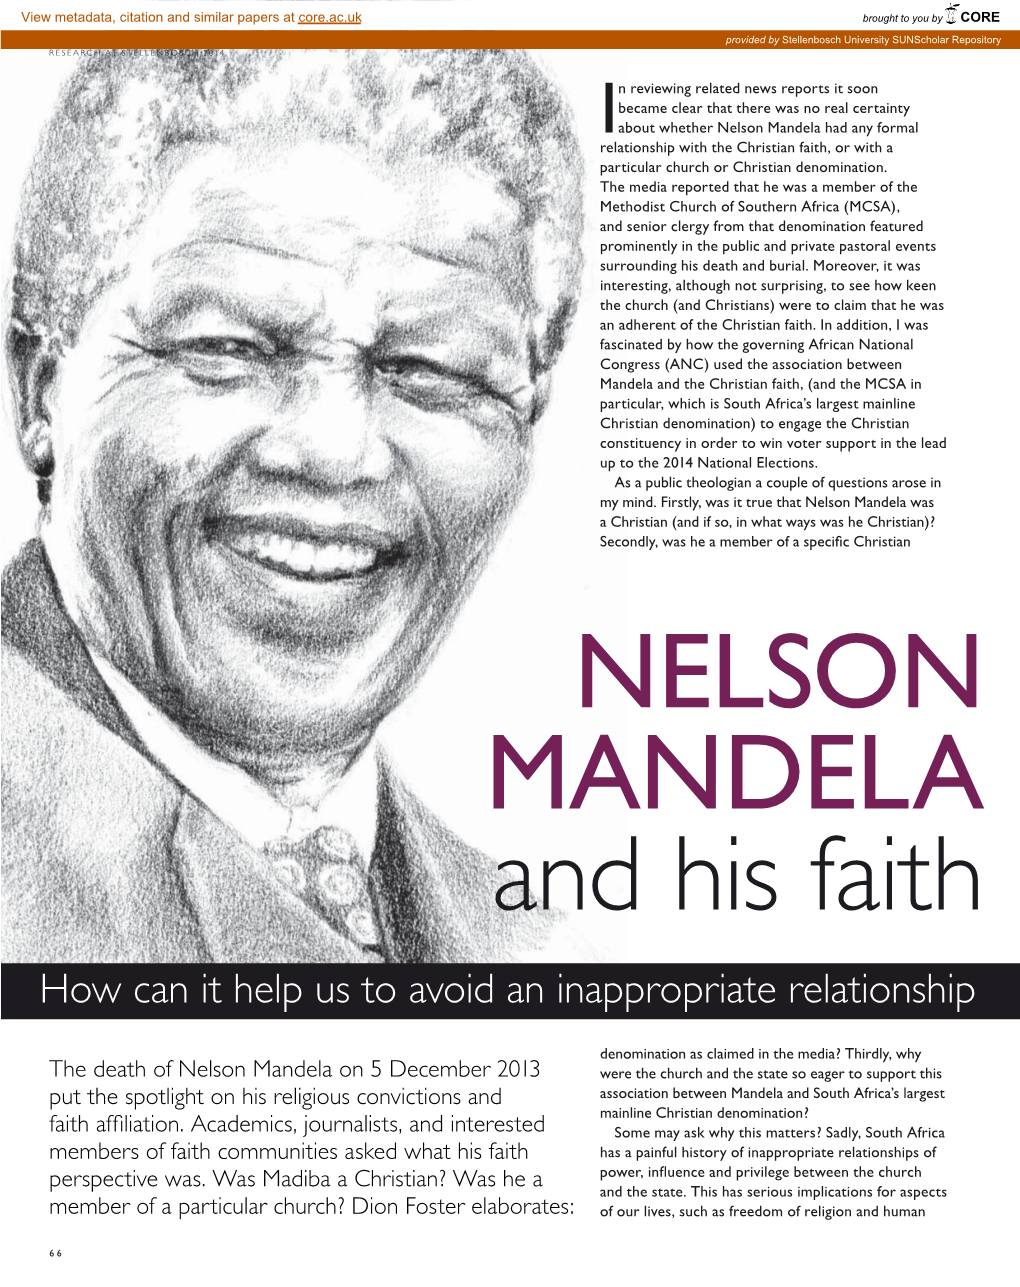 NELSON MANDELA and His Faith How Can It Help Us to Avoid an Inappropriate Relationship